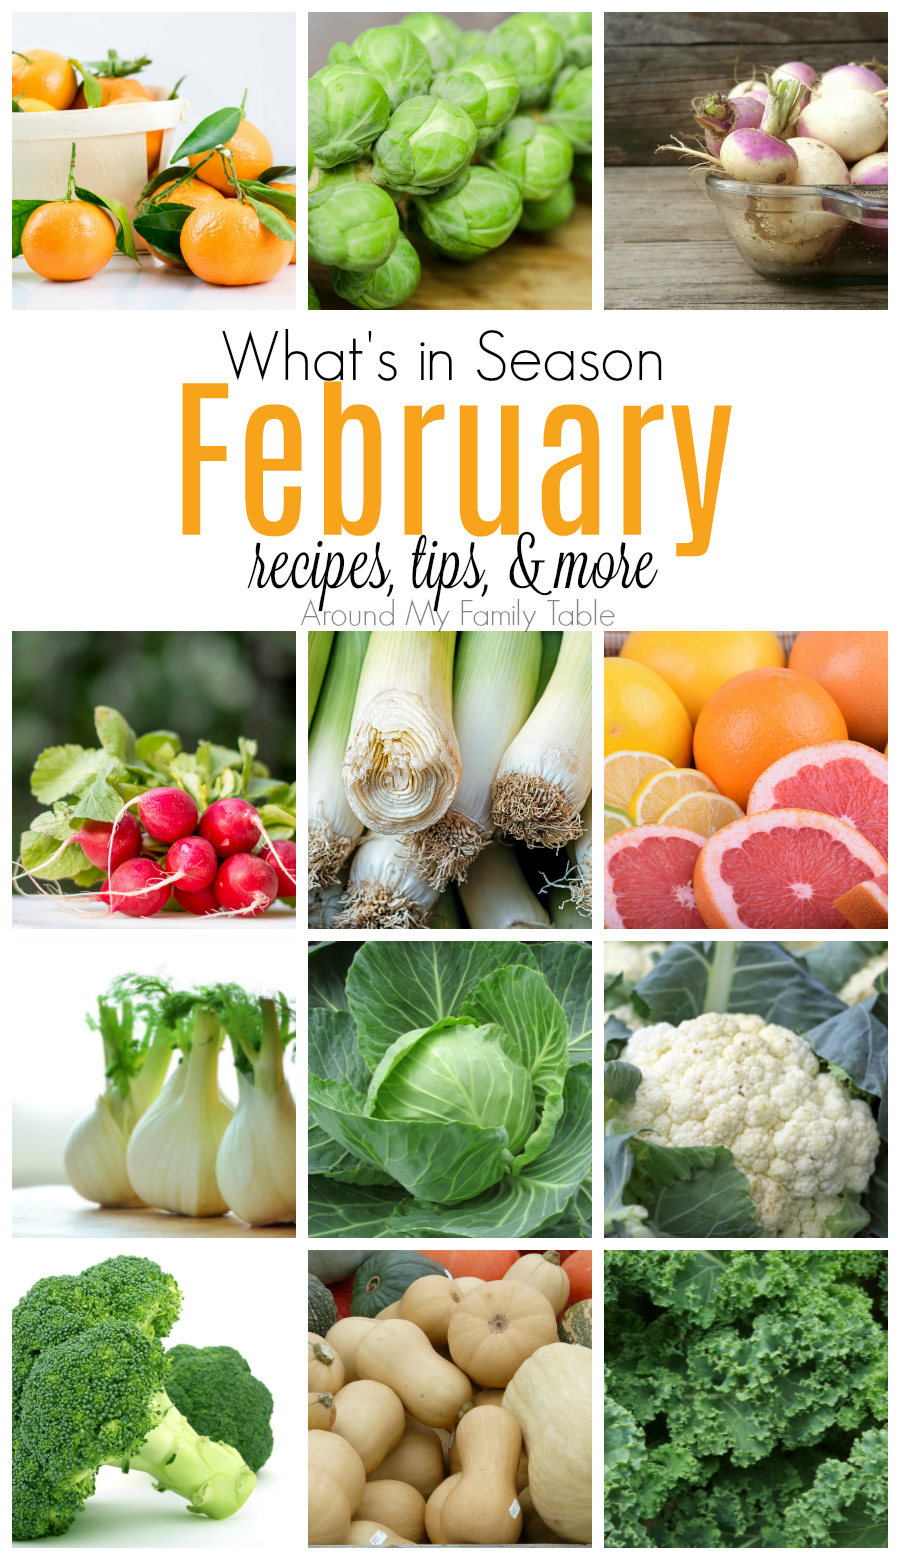 This February -- What's In Season Guide is full of tips and recipes to inspire you to shop and eat seasonally. #seaonalproduce #whatsinseason #february